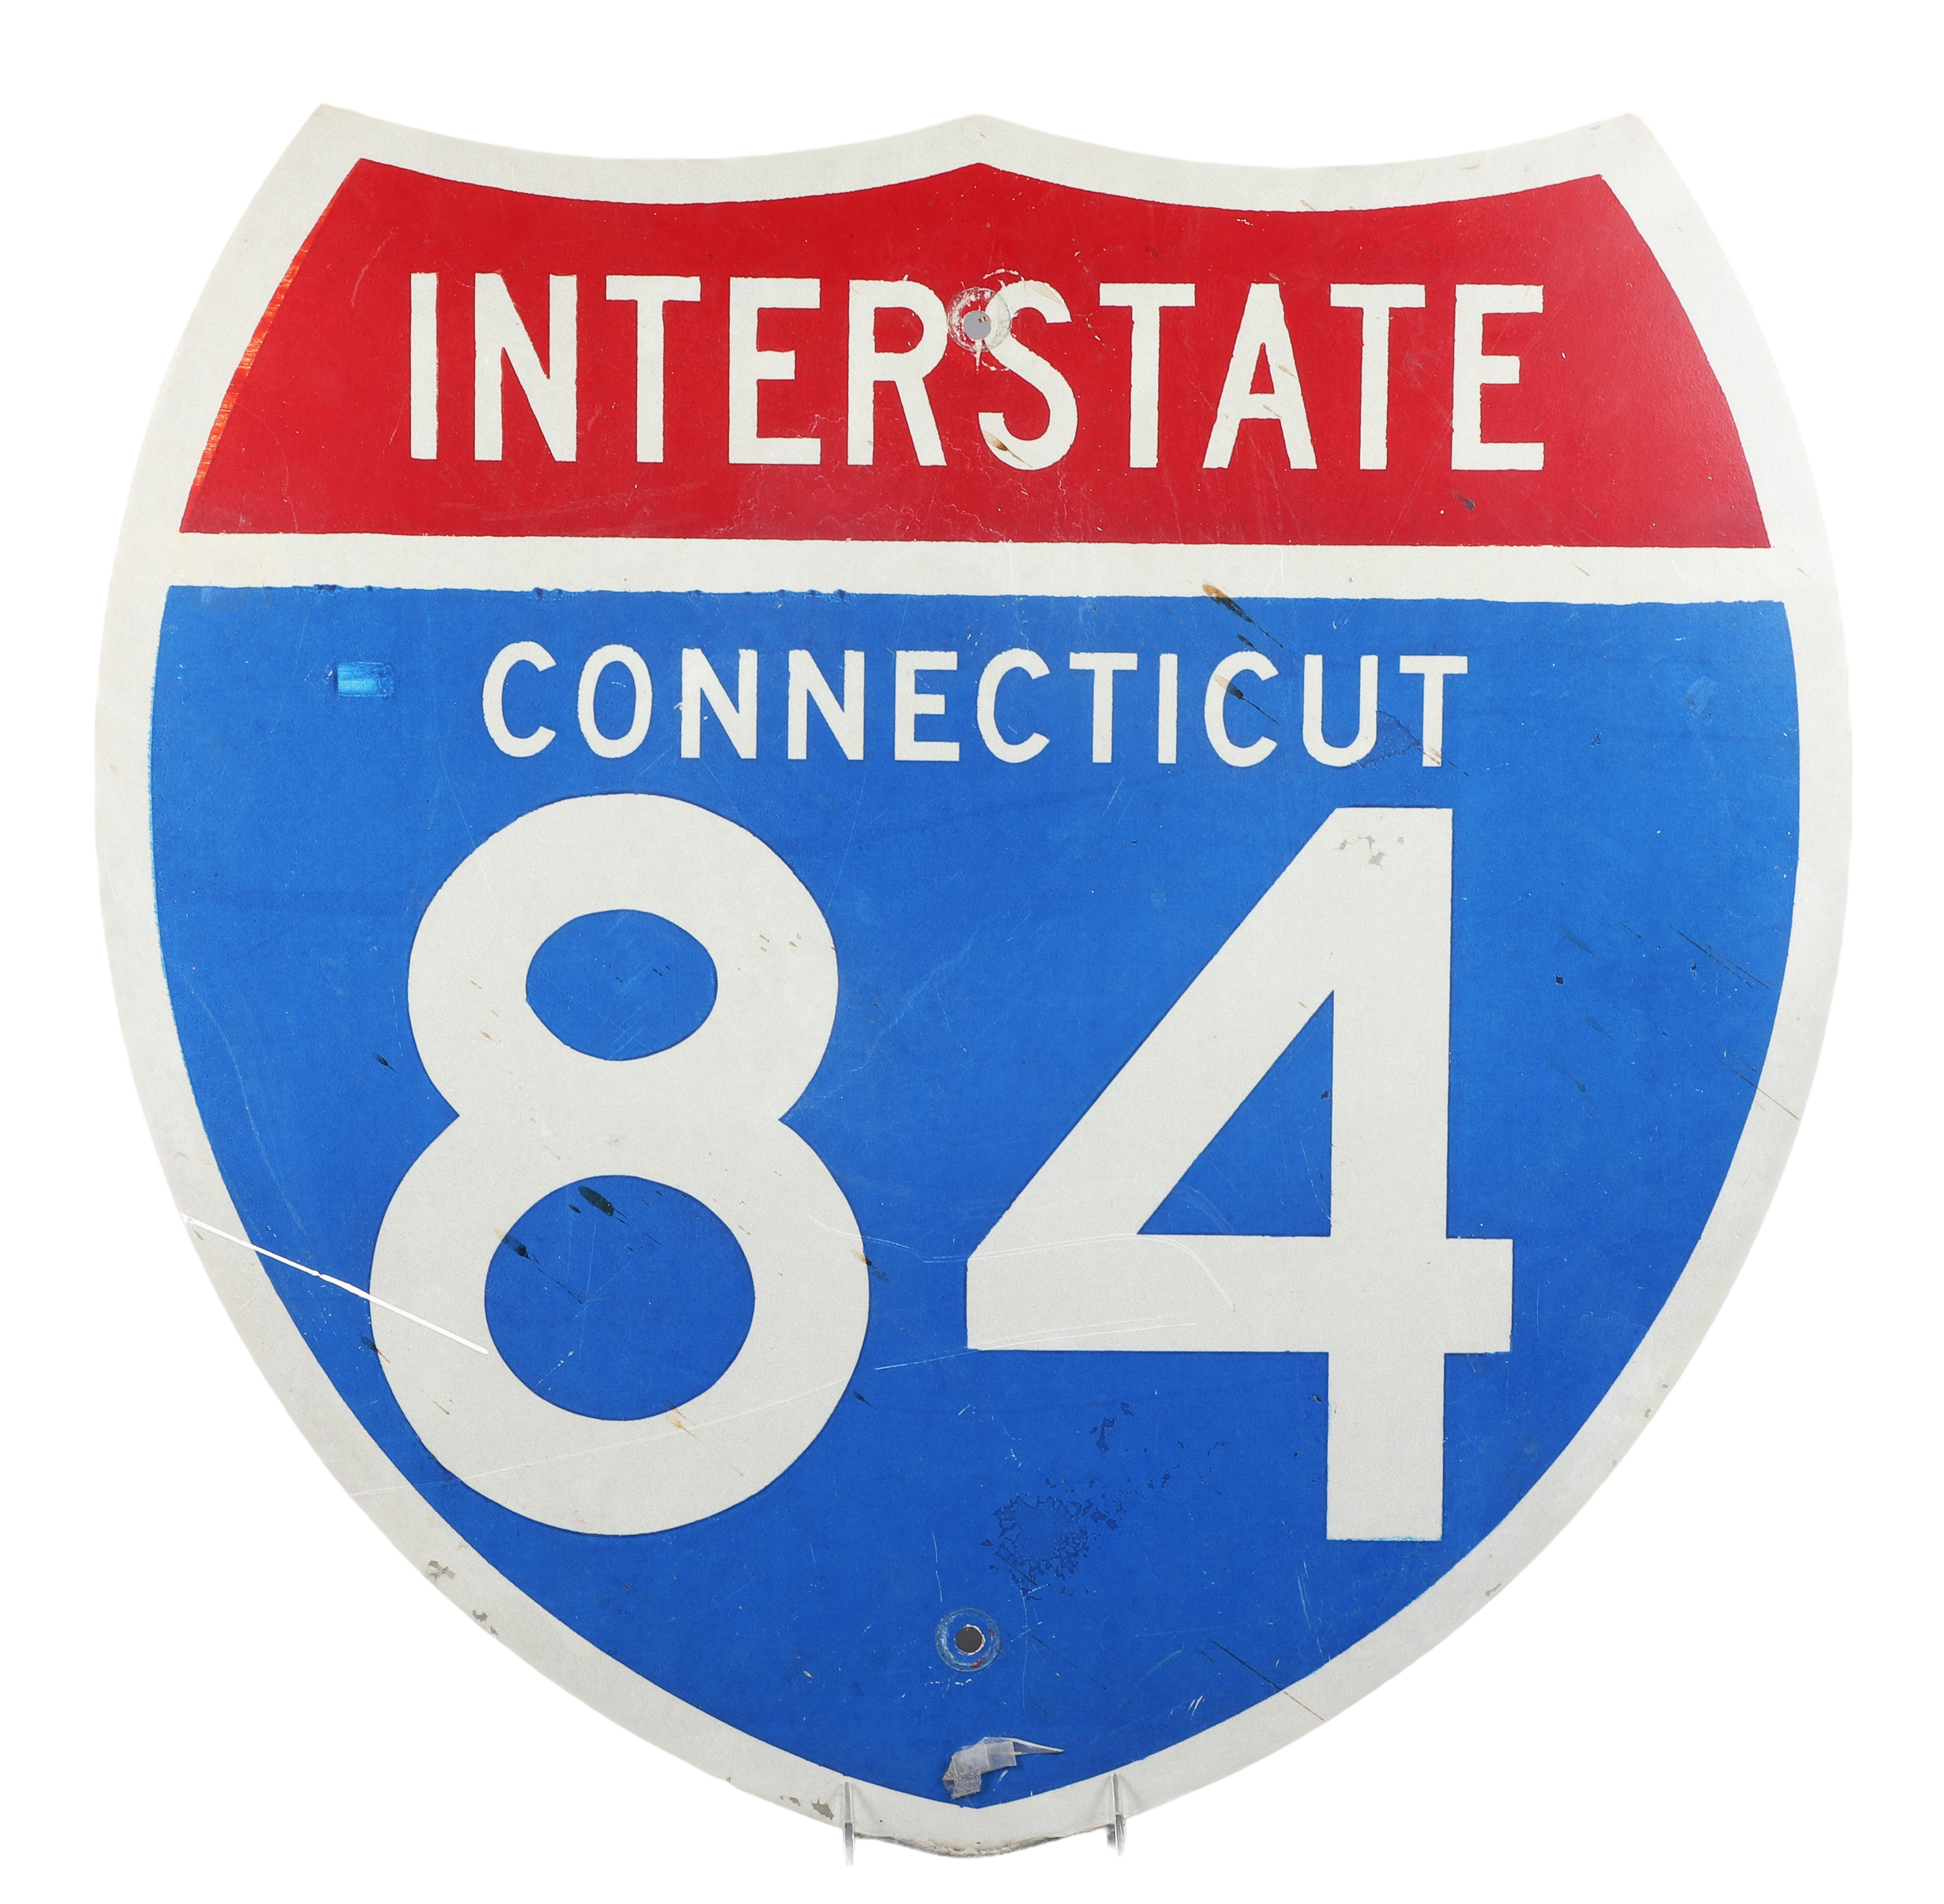 Connecticut Interstate 84 highway sign,